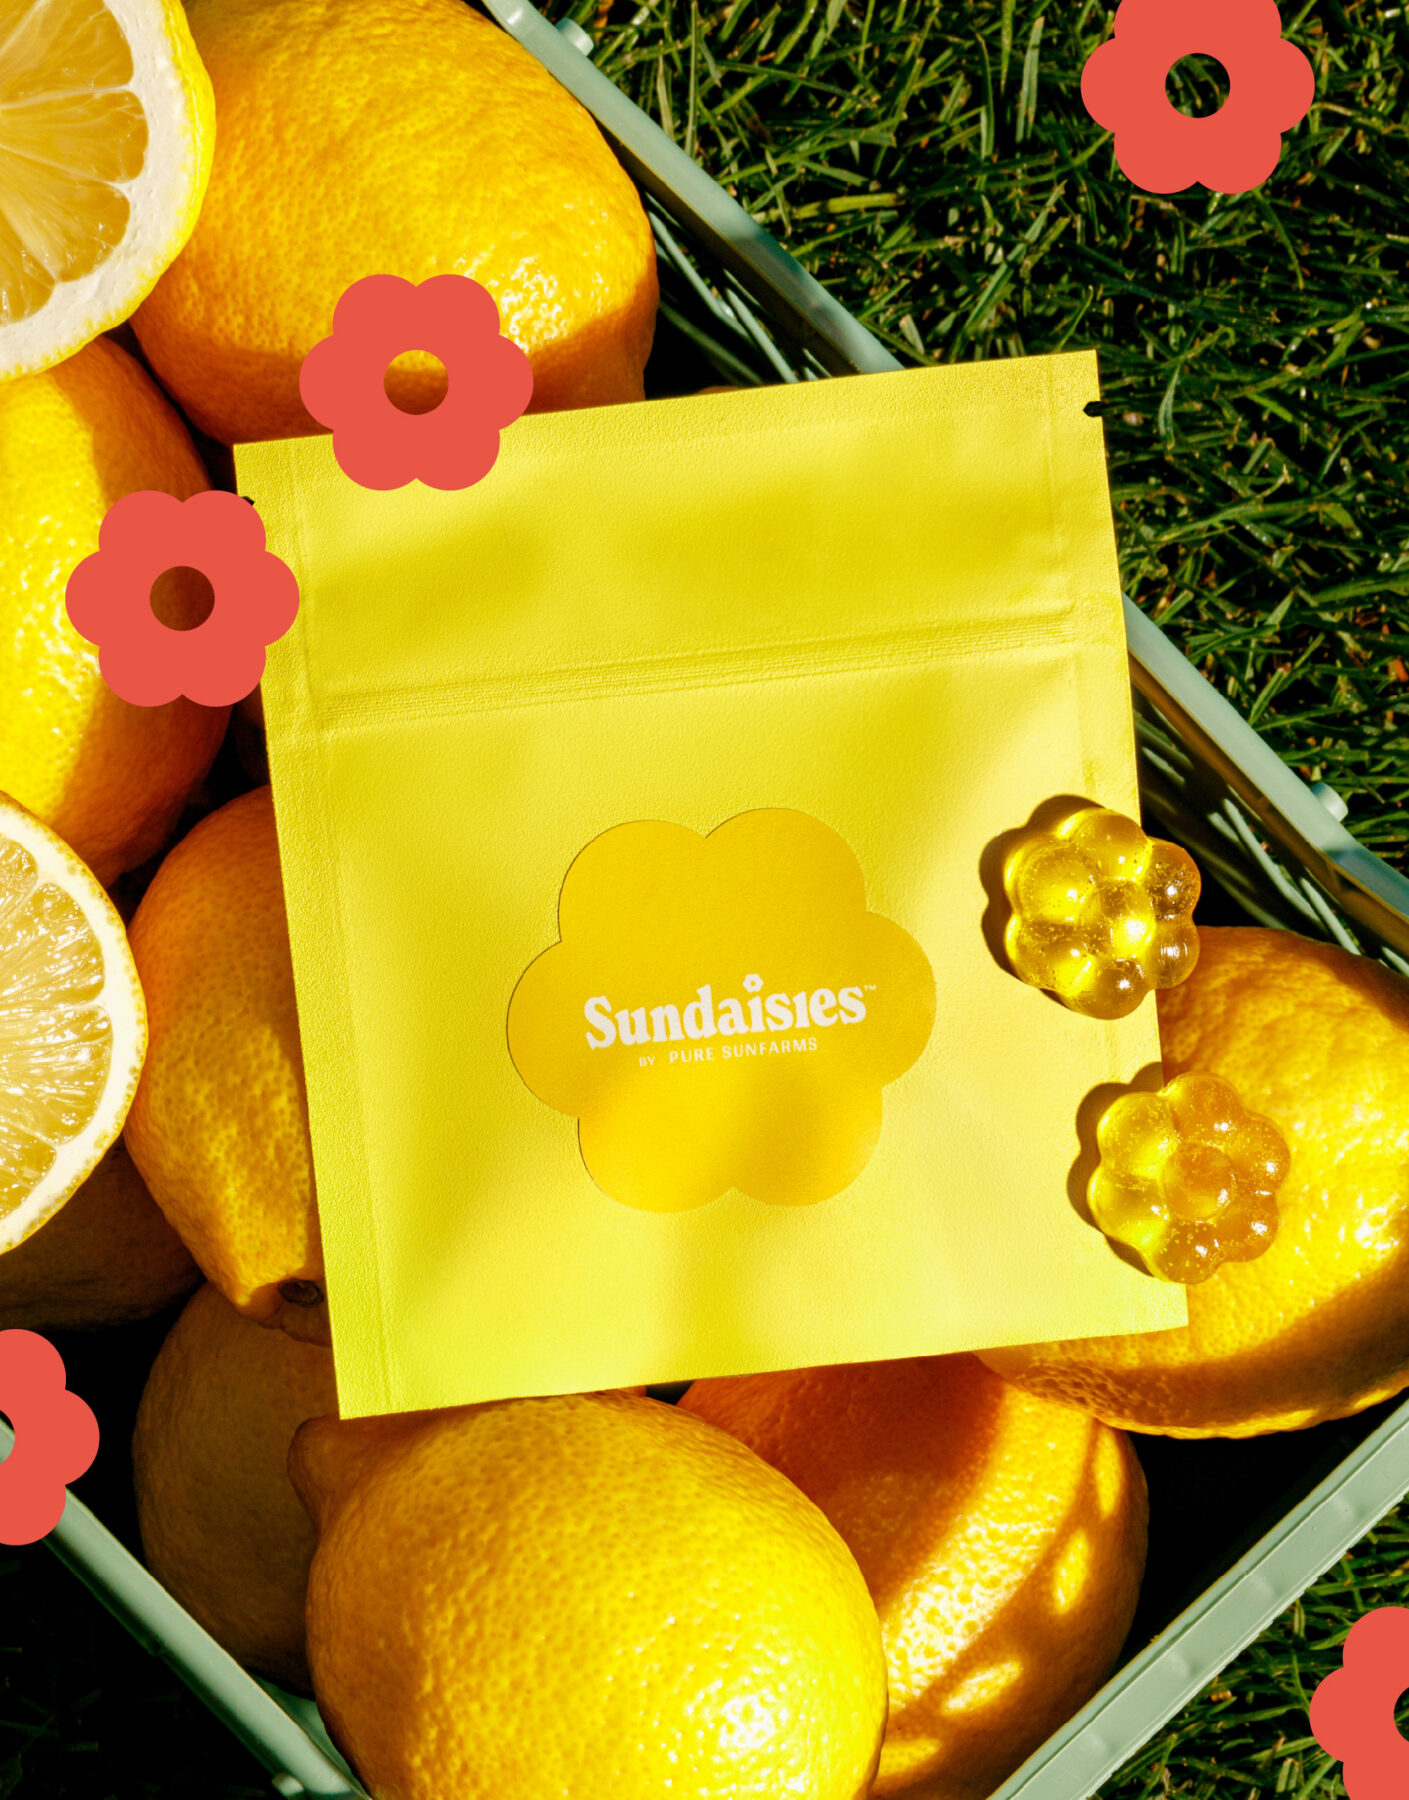 Sundaisies by Pure Sunfarms Packaging